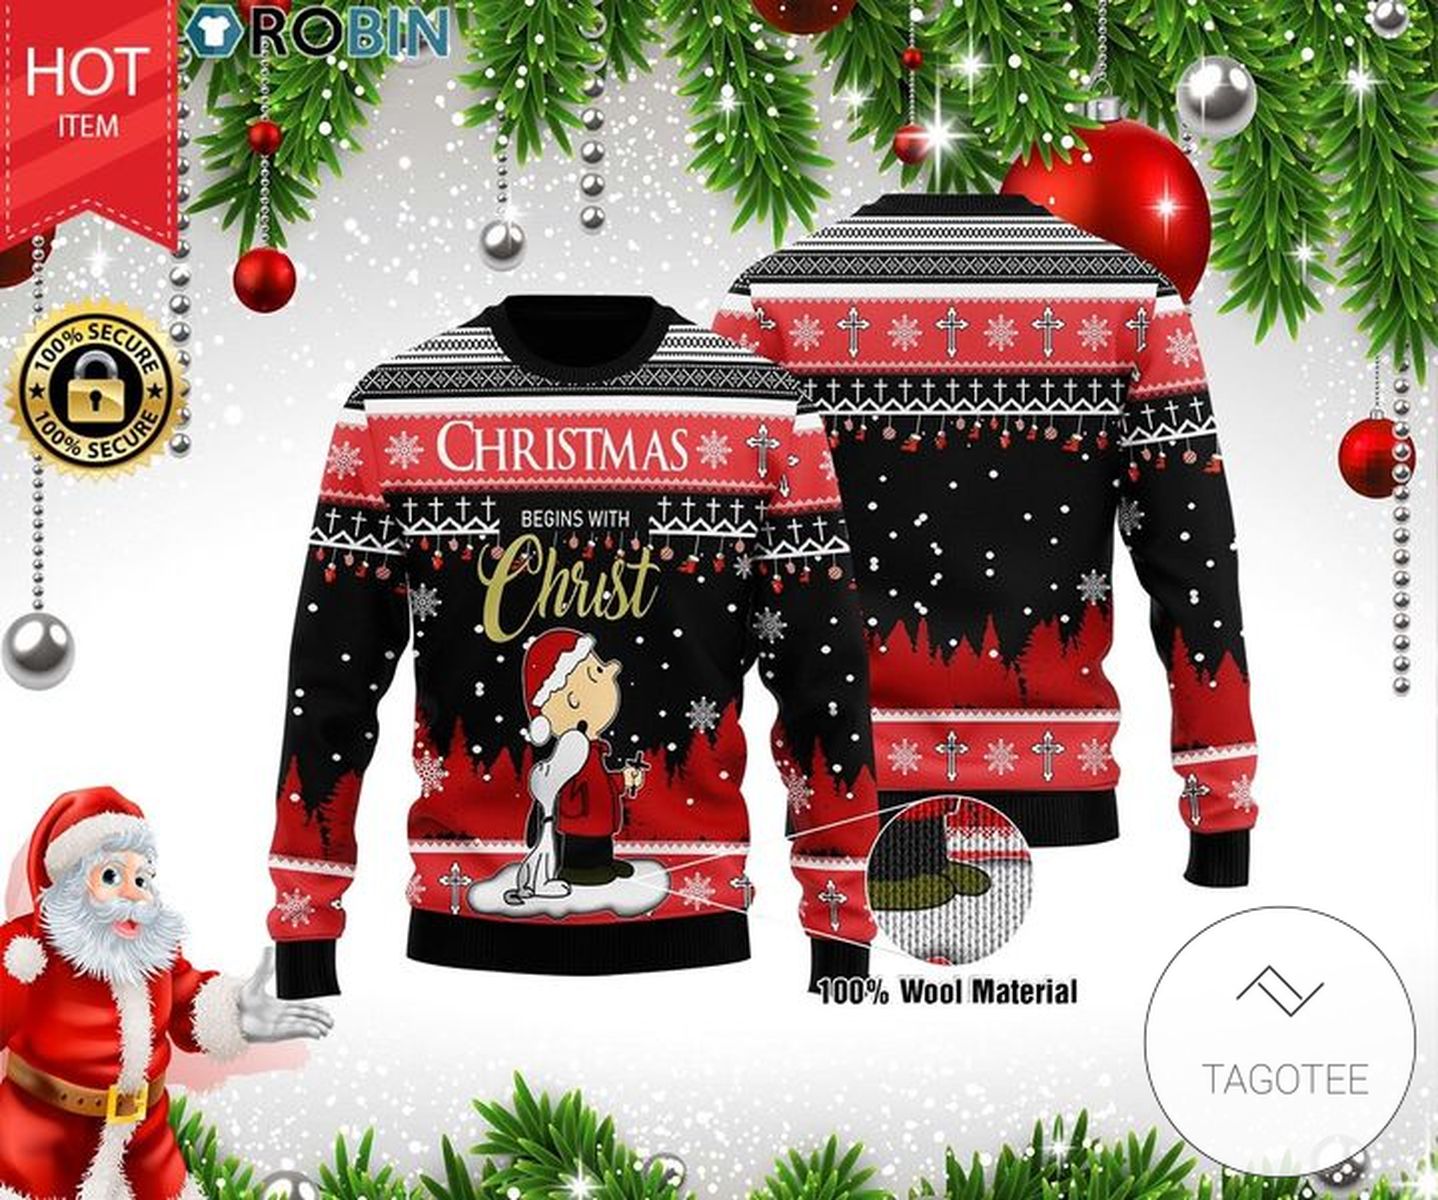 Snoopy Christmas Begins With Christ Woolen Sweater